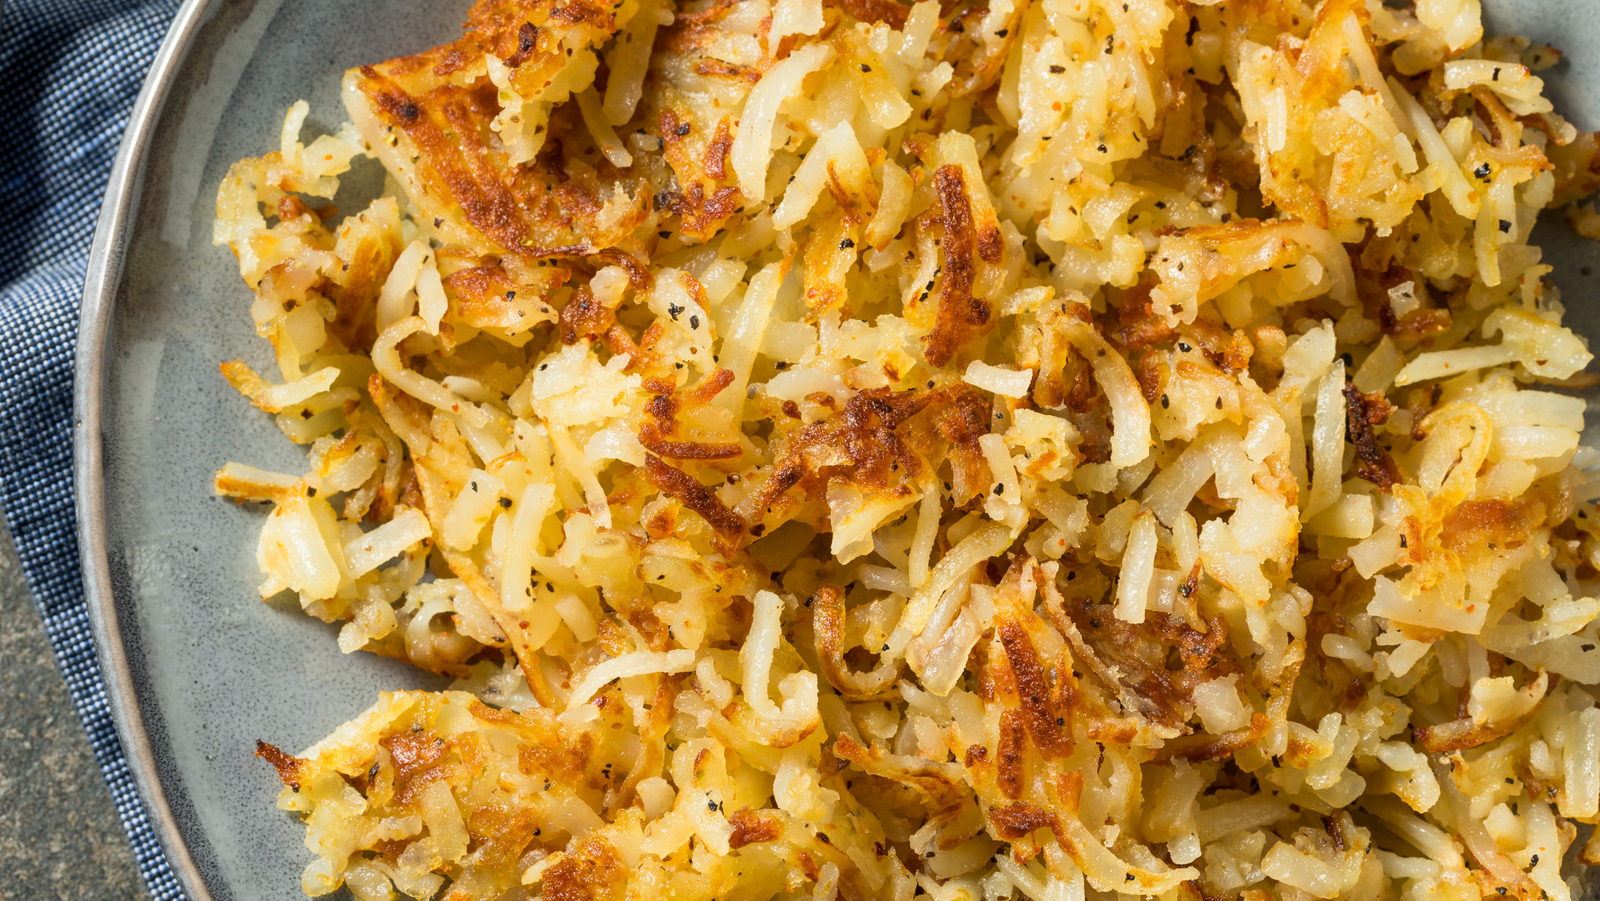 Why the Air Fryer Should Be Your First Choice for Frozen Hash Browns